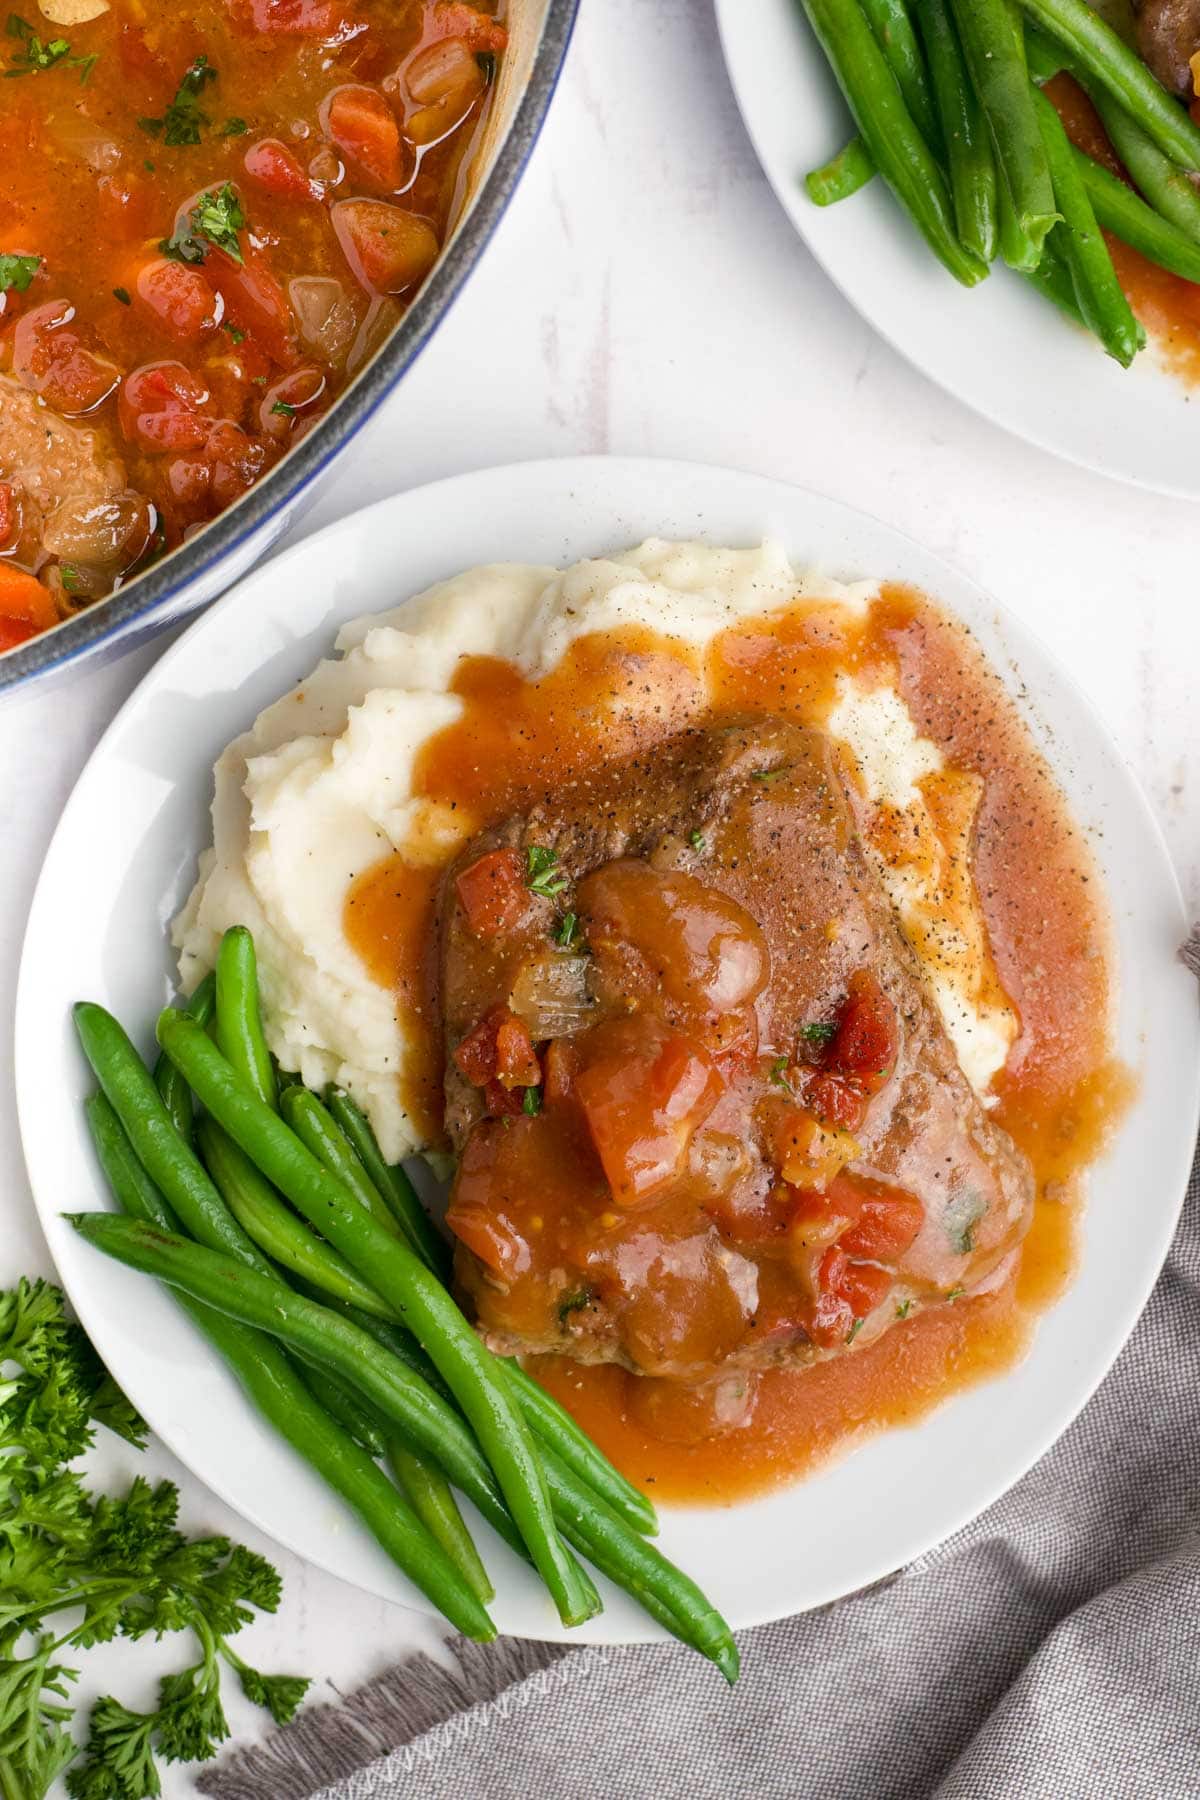 Swiss Steak with tomatoes served over mashed potatoes and with green beans.